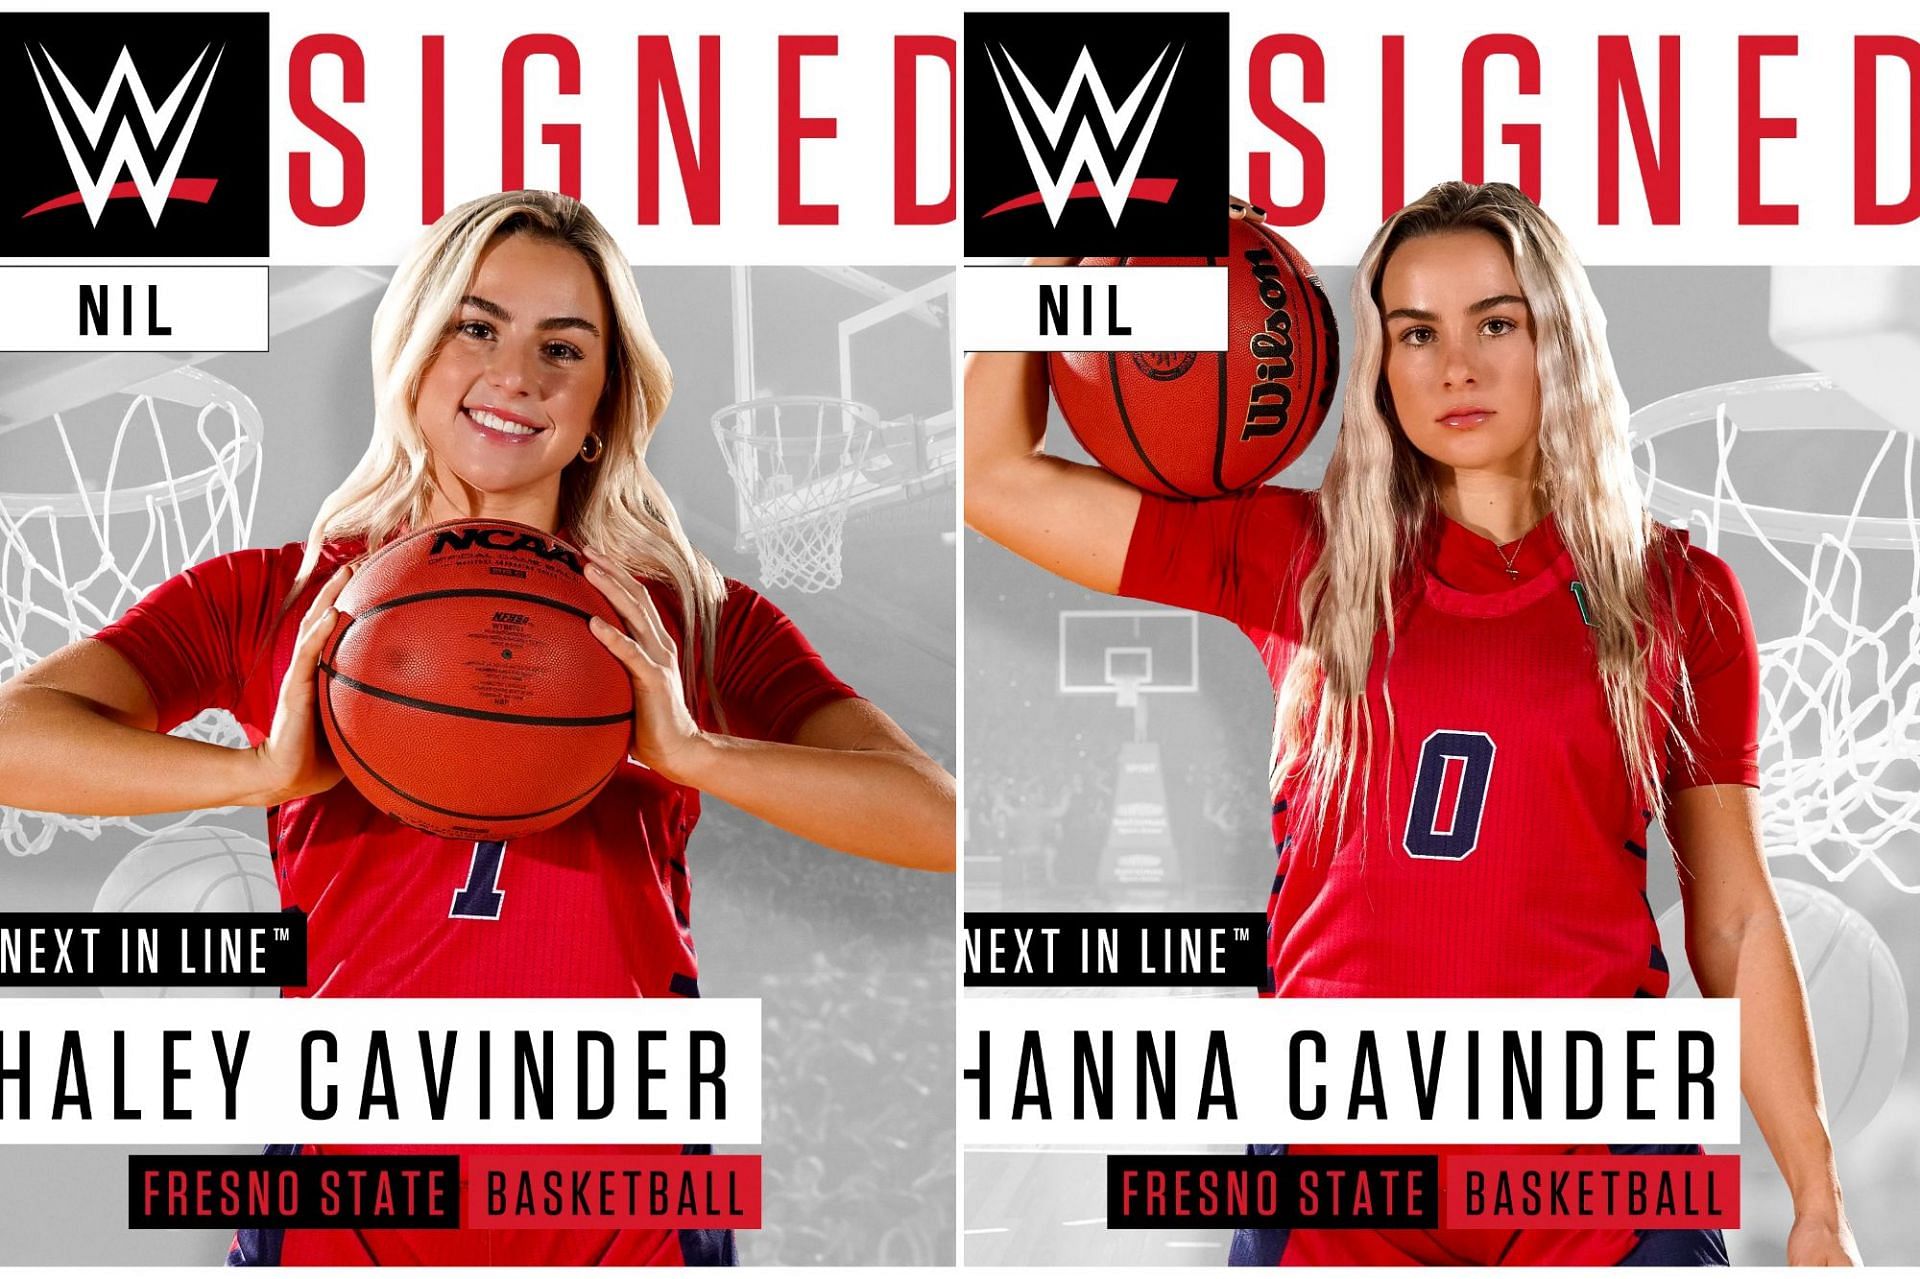 Haley and Hanna Cavinder are the most popular faces among the 15 selected athletes